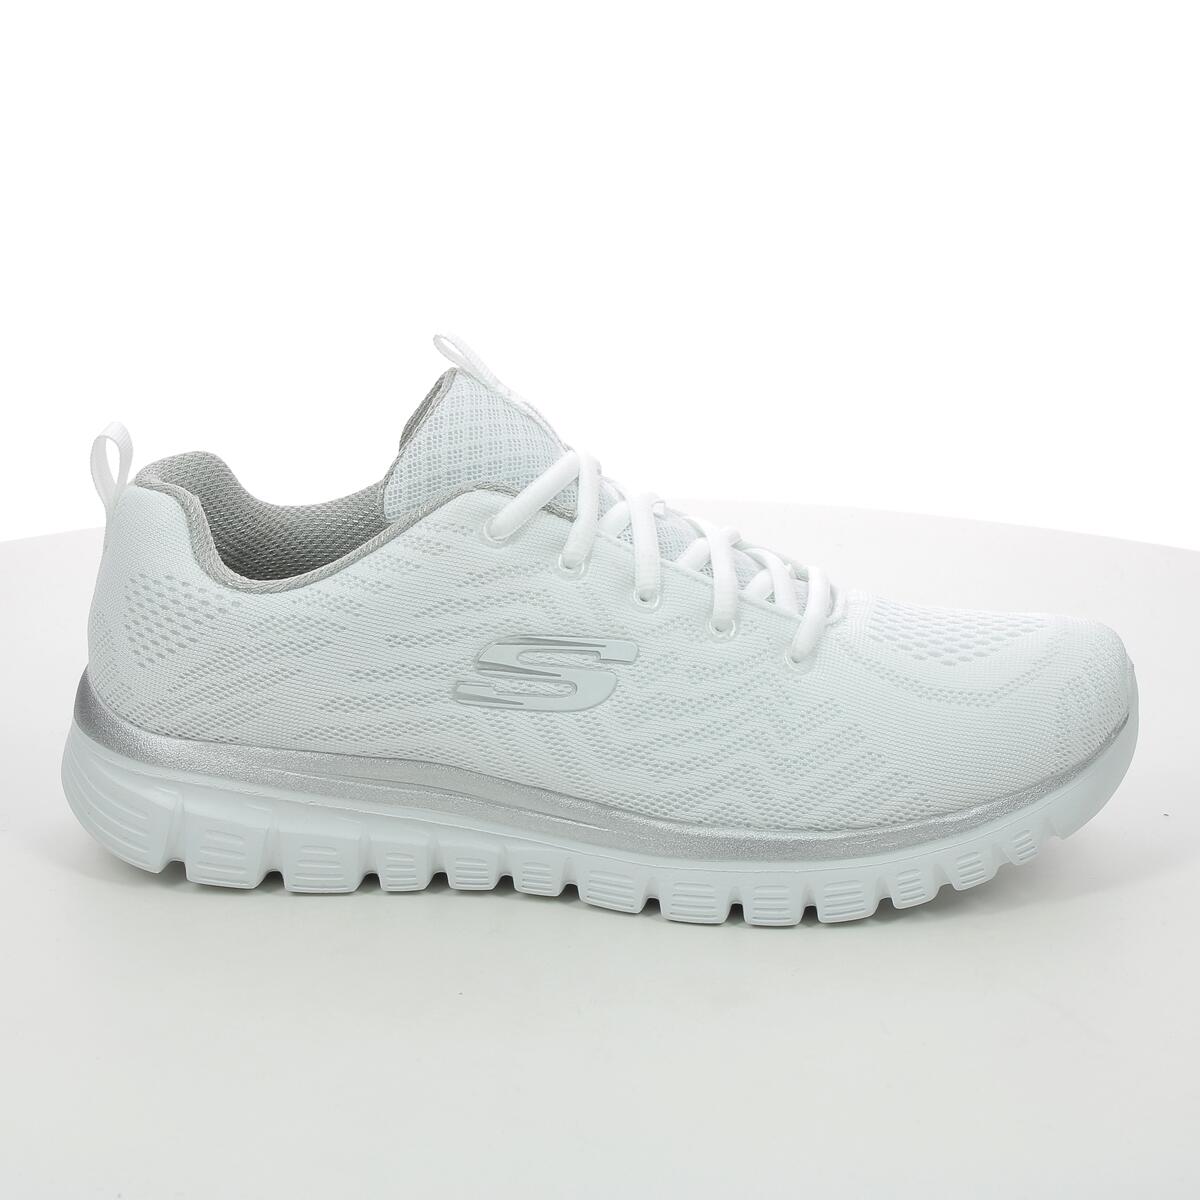 Womens/Ladies Graceful Get Connected Trainers (White) 4/5